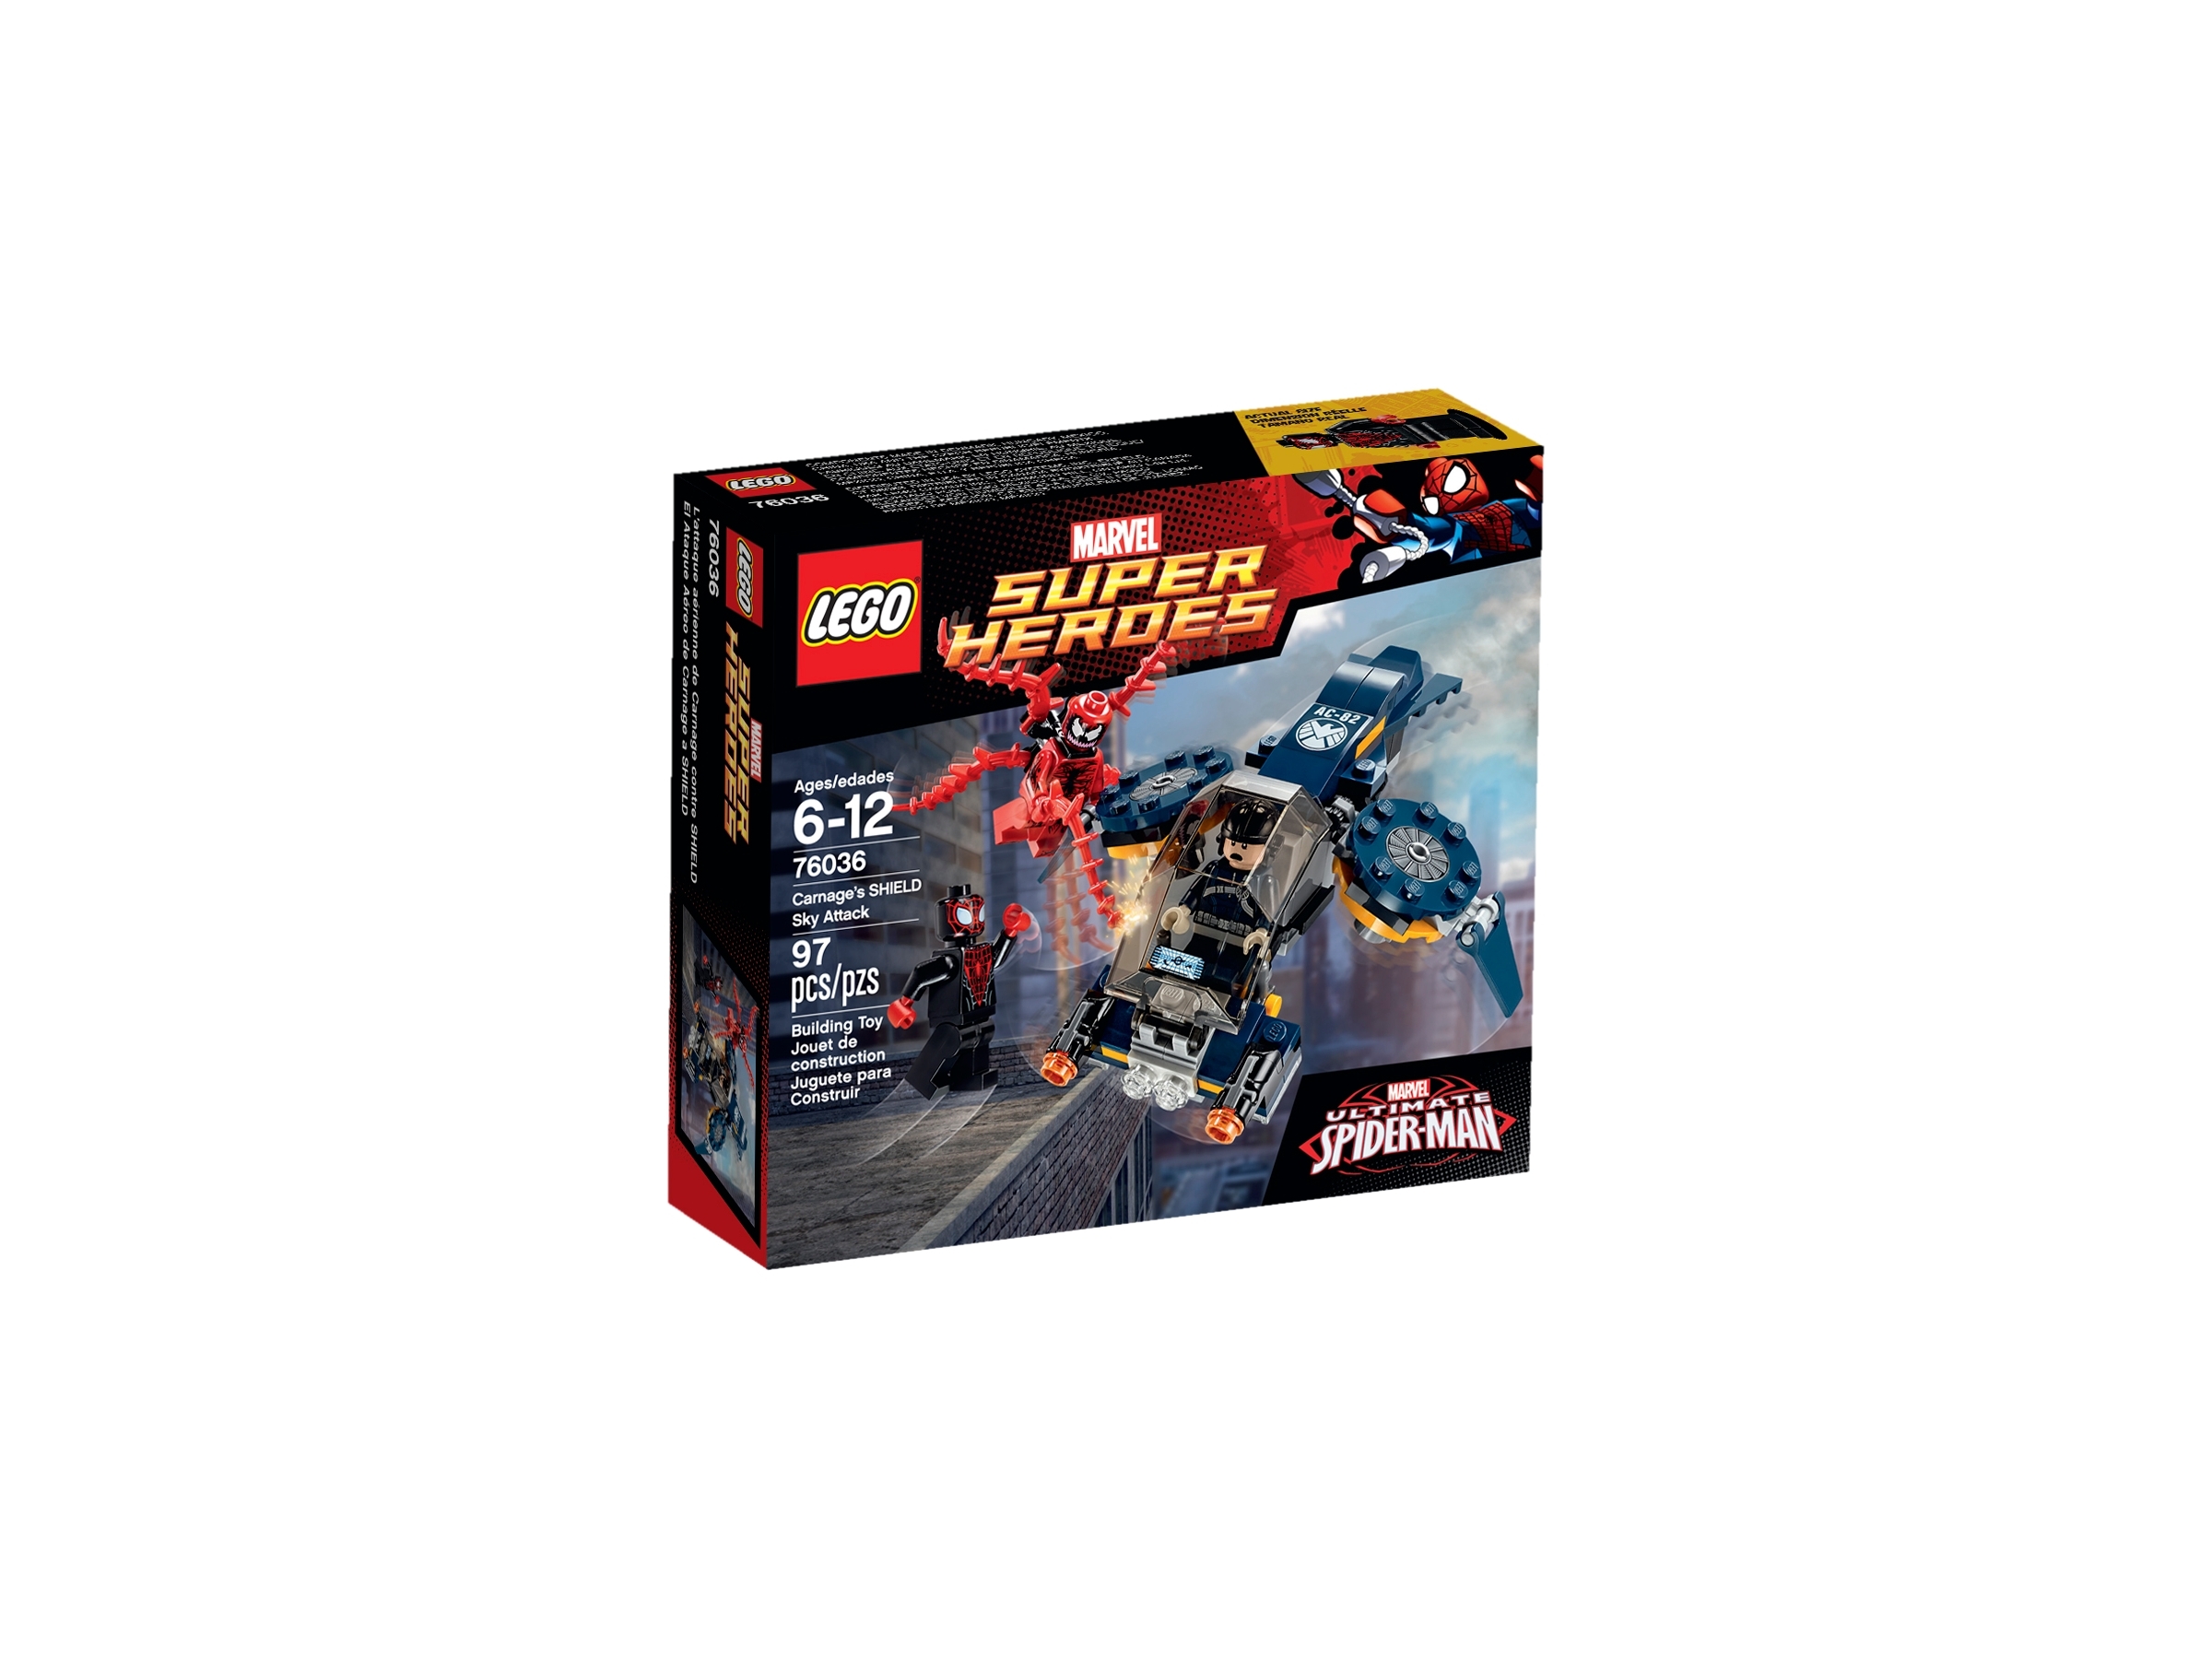 LEGO Super Heroes 76036 Carnage's Shield Sky Attack Set In New Box Sealed #76036 